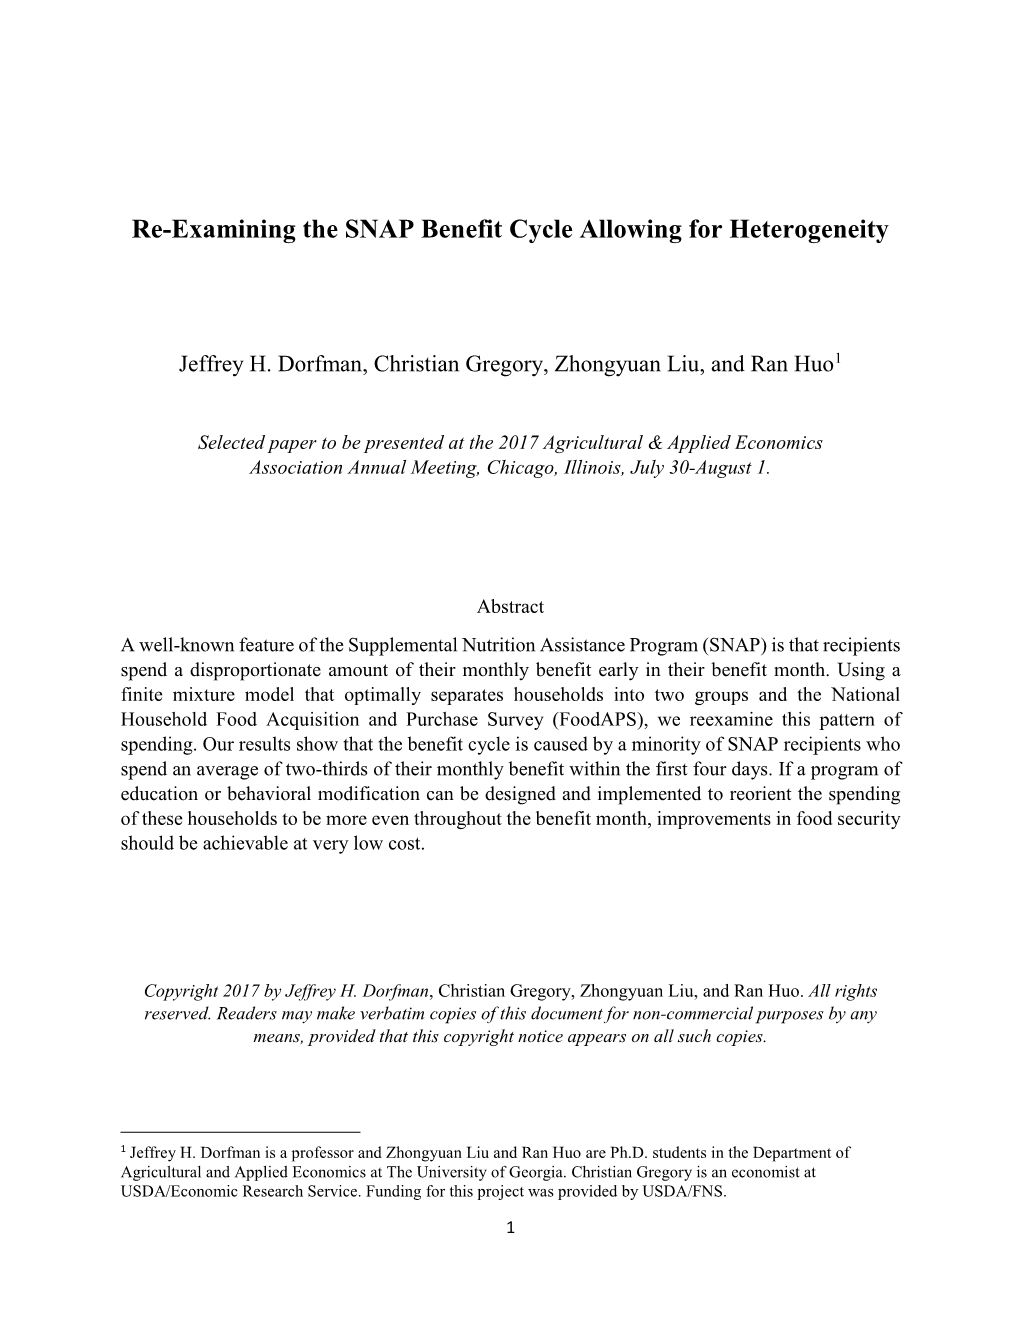 Re-Examining the SNAP Benefit Cycle Allowing for Heterogeneity